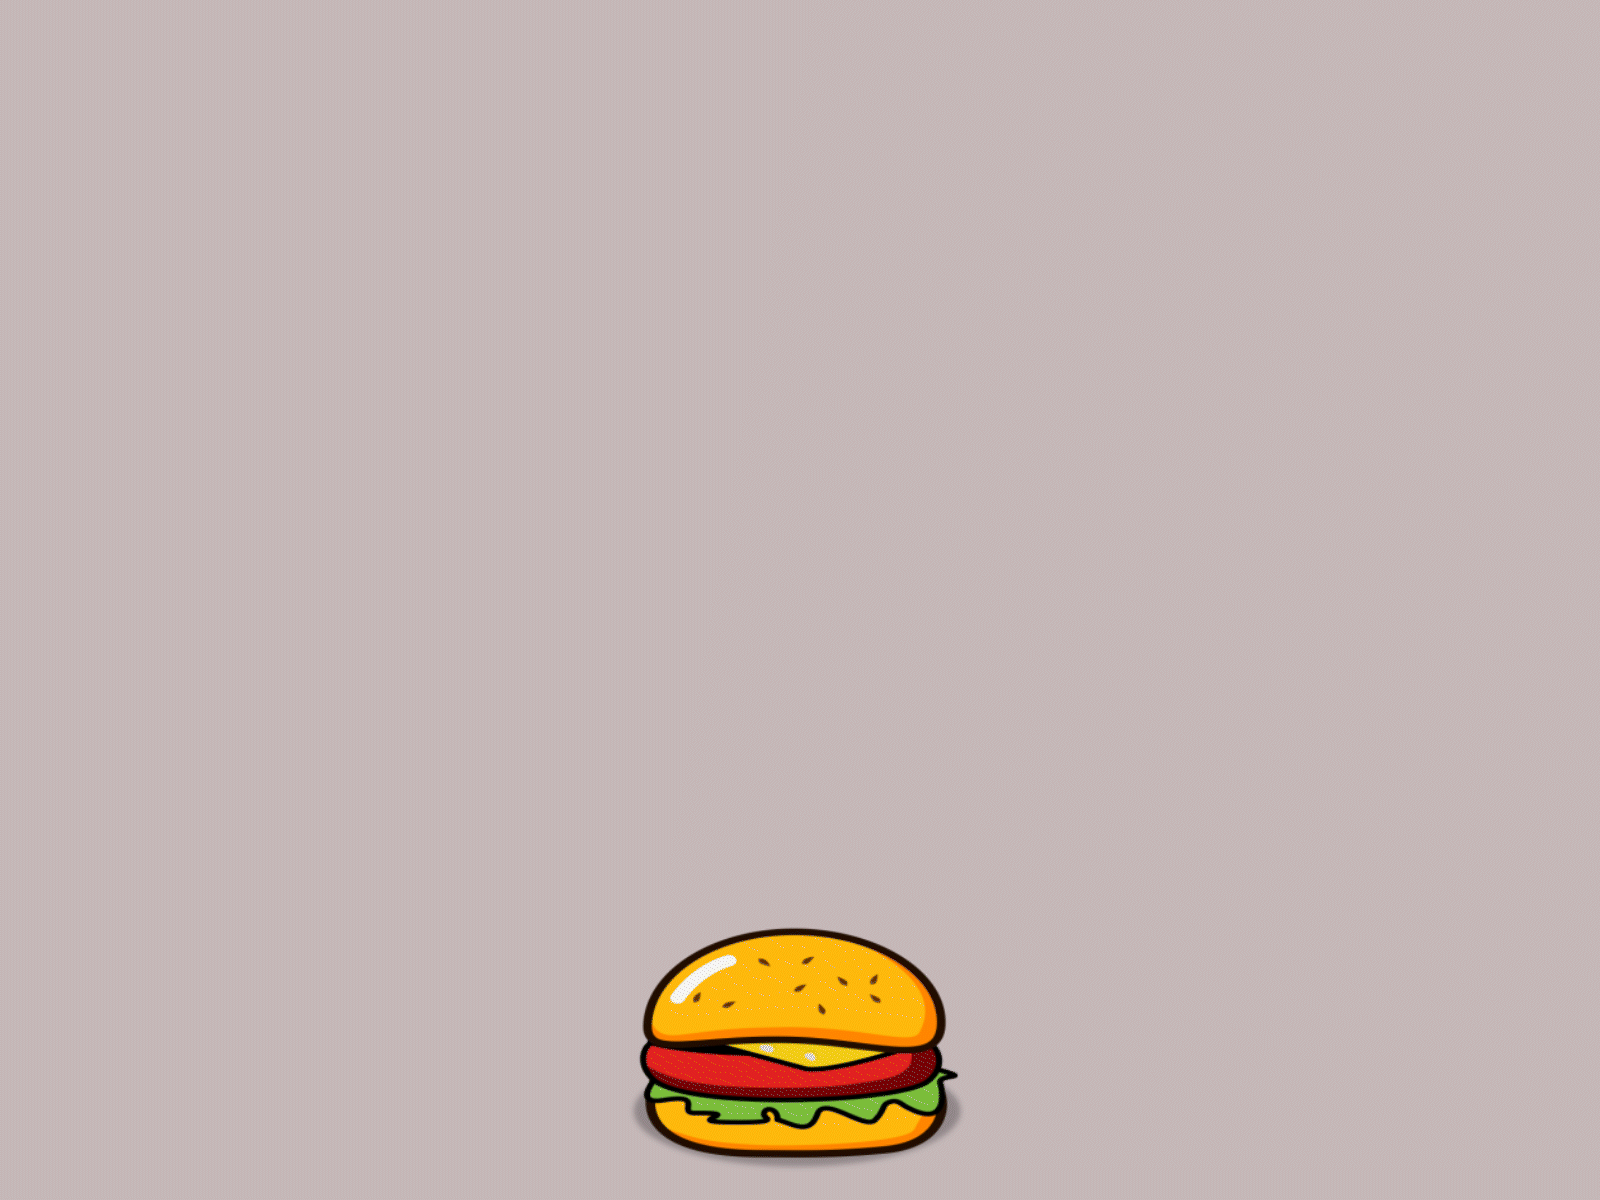 Burger Bounce after effects animationfood ball ballbounce bounce burger free funny icon illustration logo loop lottie mcdonalds trampoline